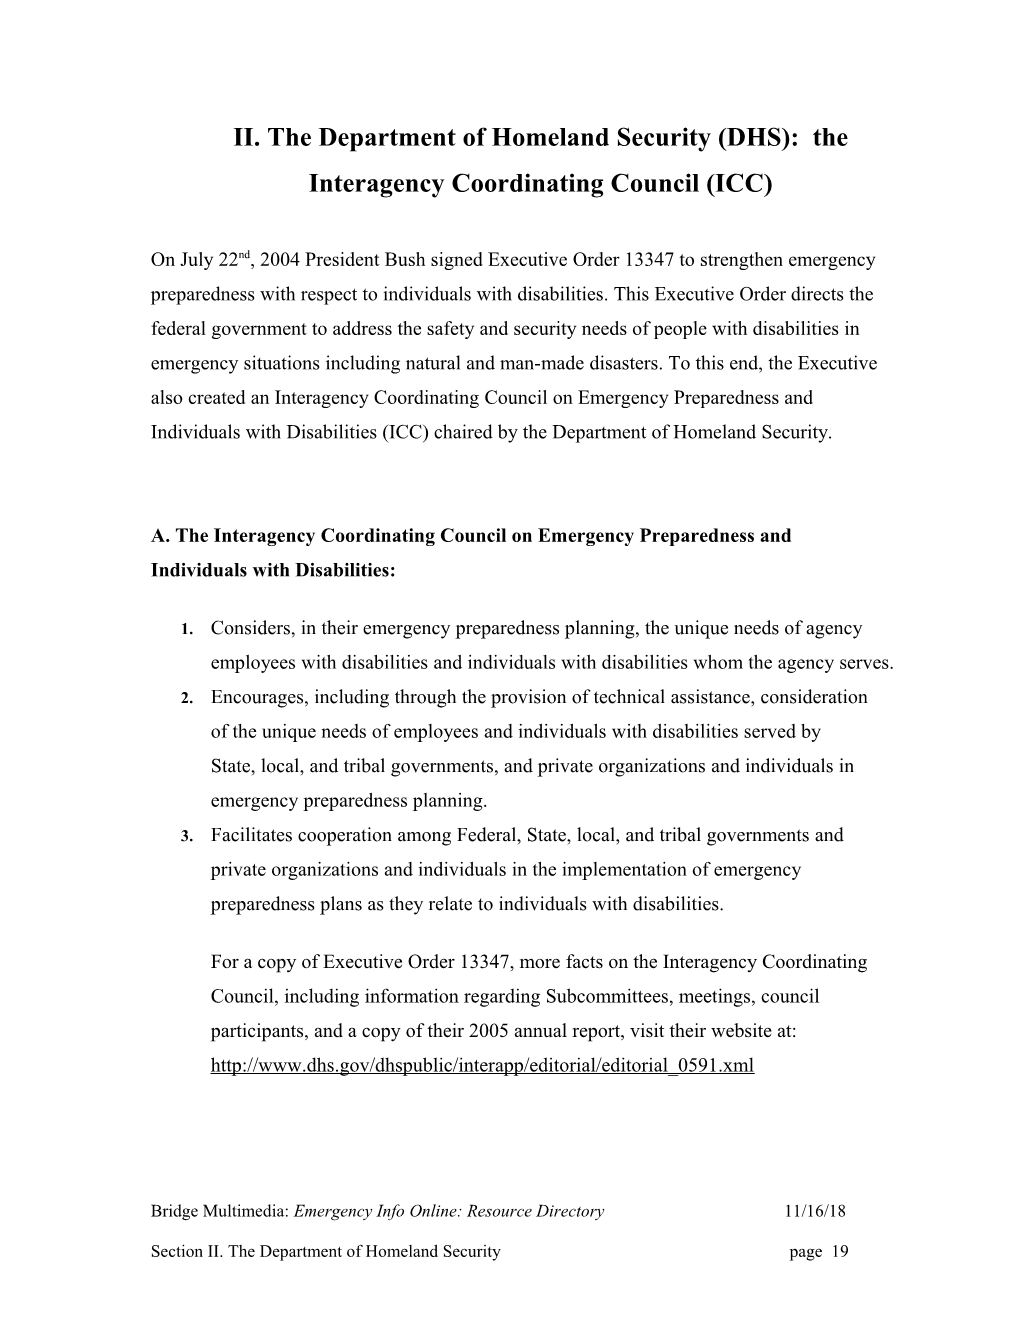 II. the Department of Homeland Security (DHS): the Interagency Coordinating Council (ICC)